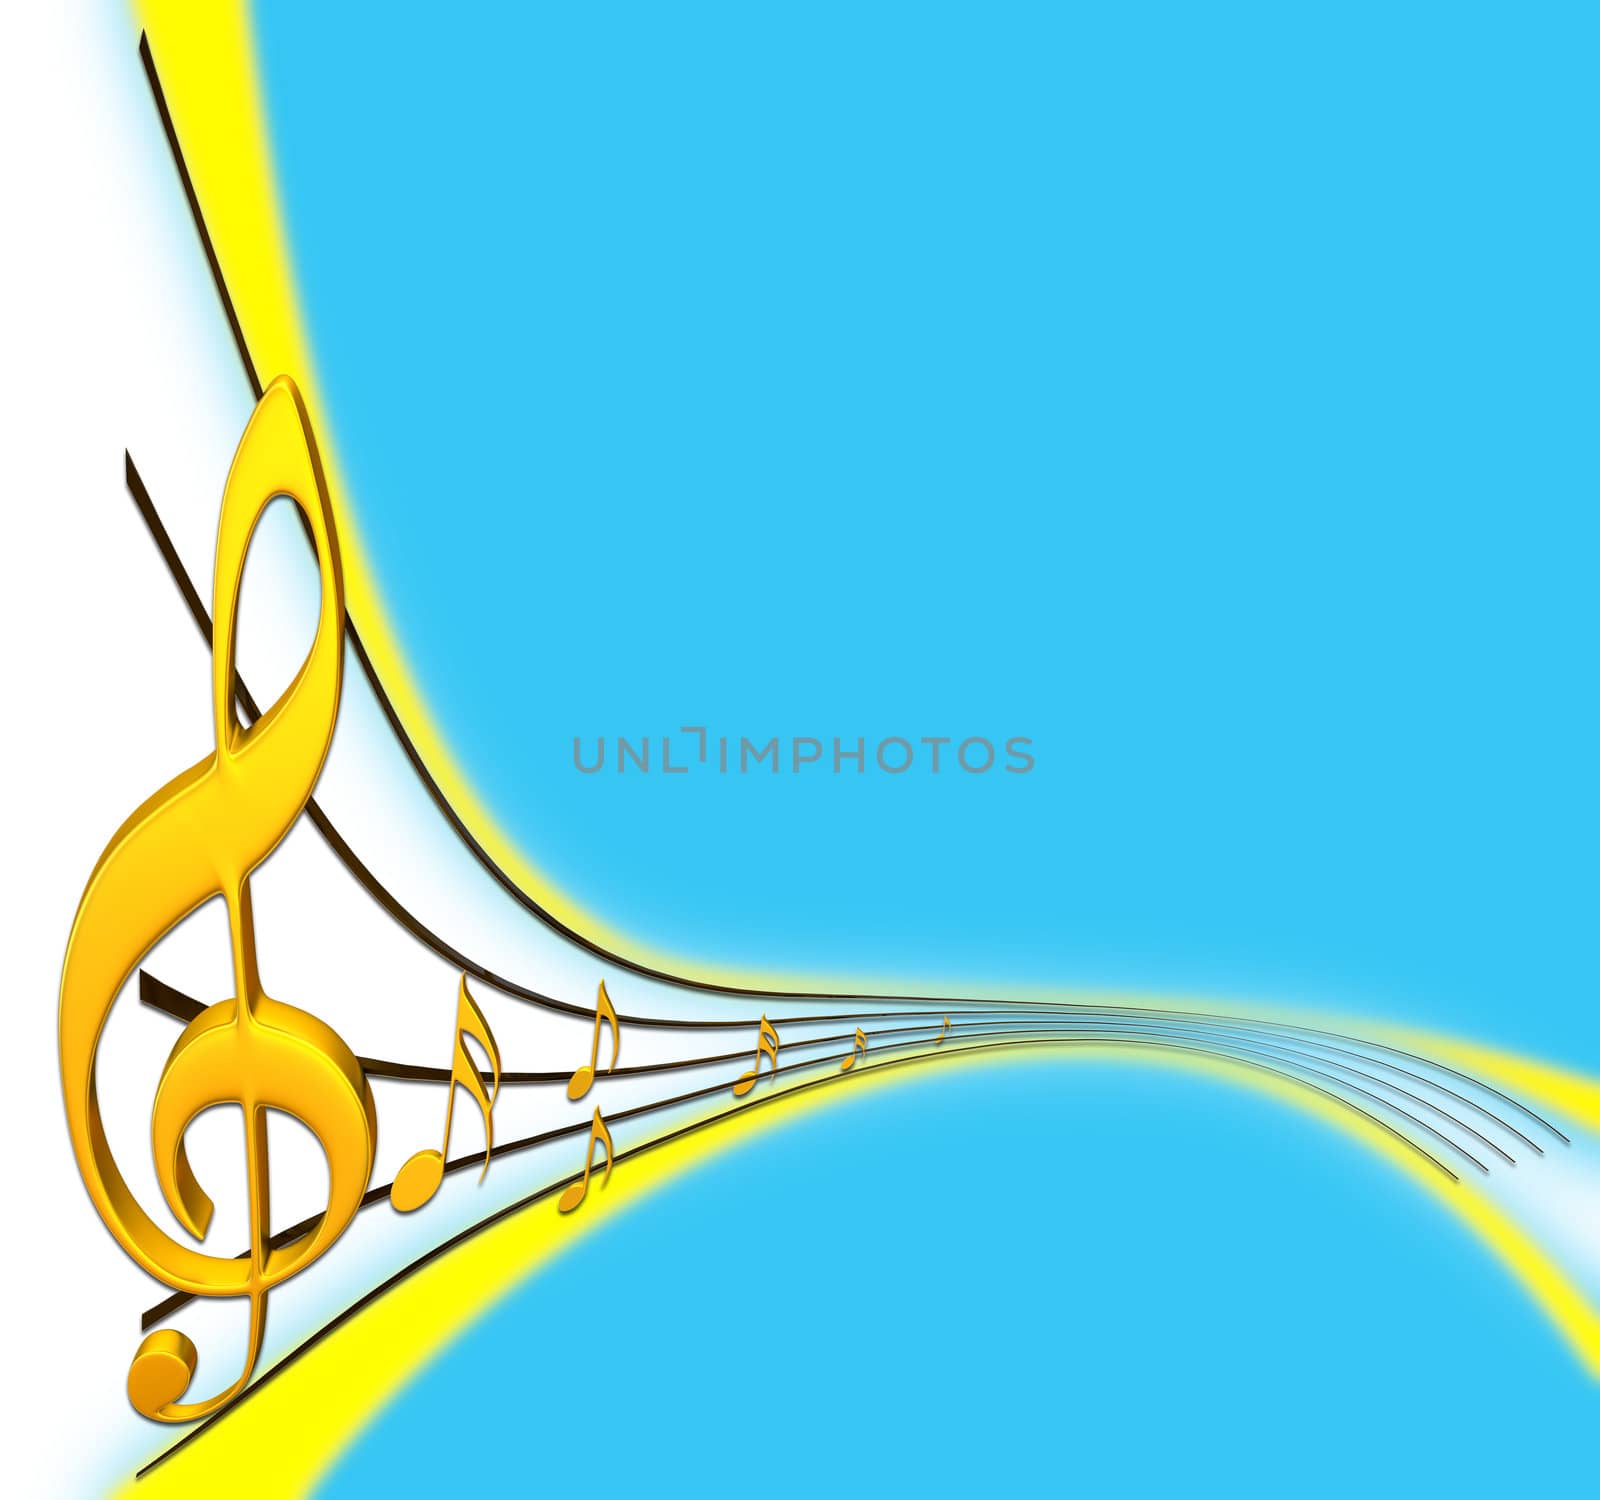 gold musical score with treble clef as a symbol of music creation